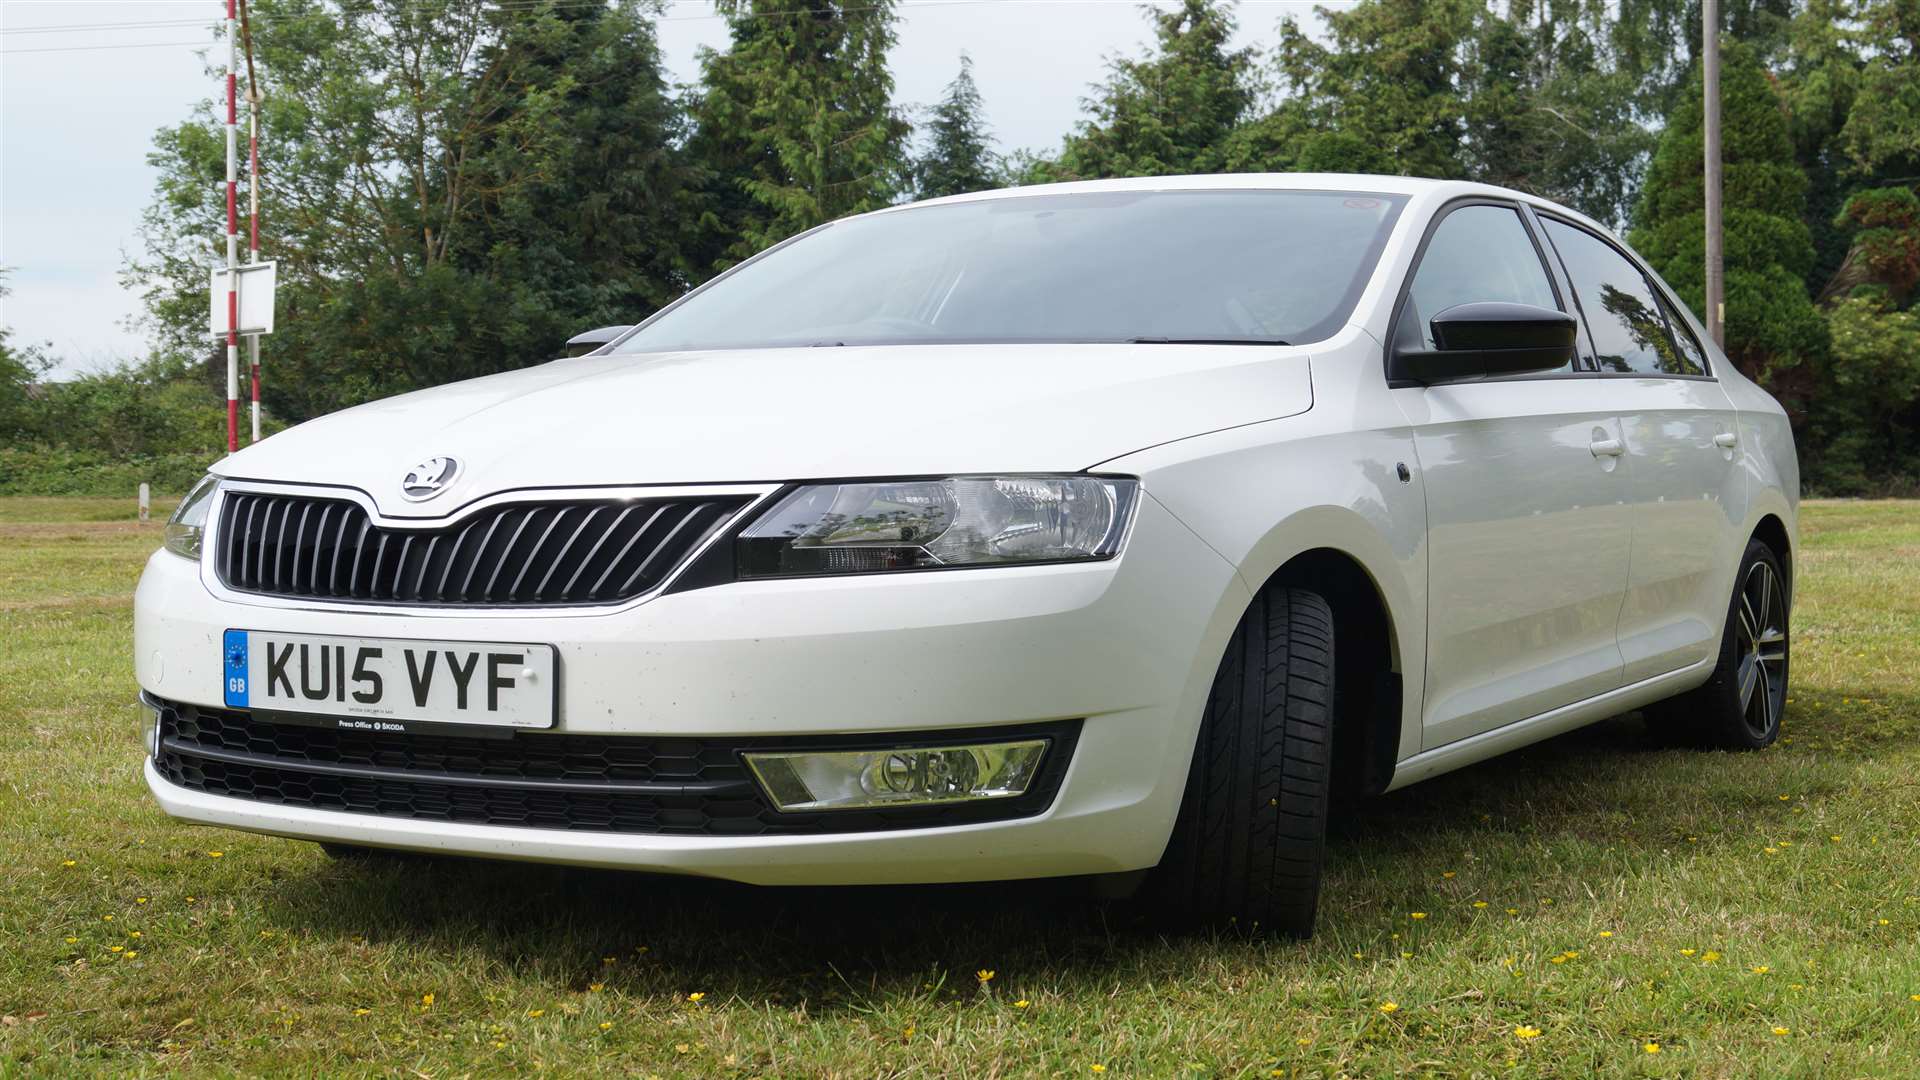 The styling is simple, unfussy and unmistakeably Skoda